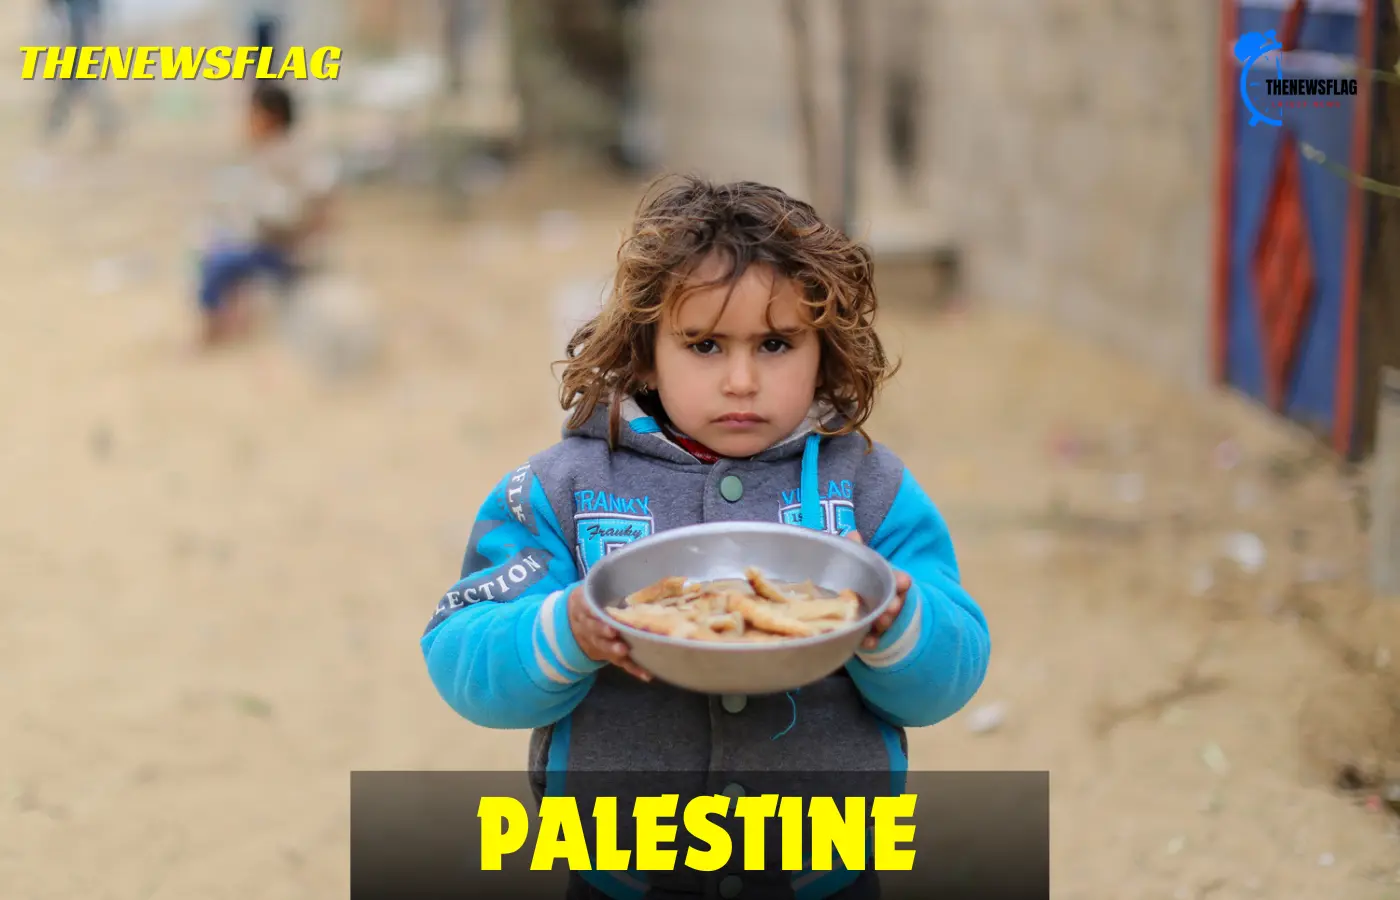 Under Israel's siege, Palestinians who are starving are frantically scurrying for food handouts.